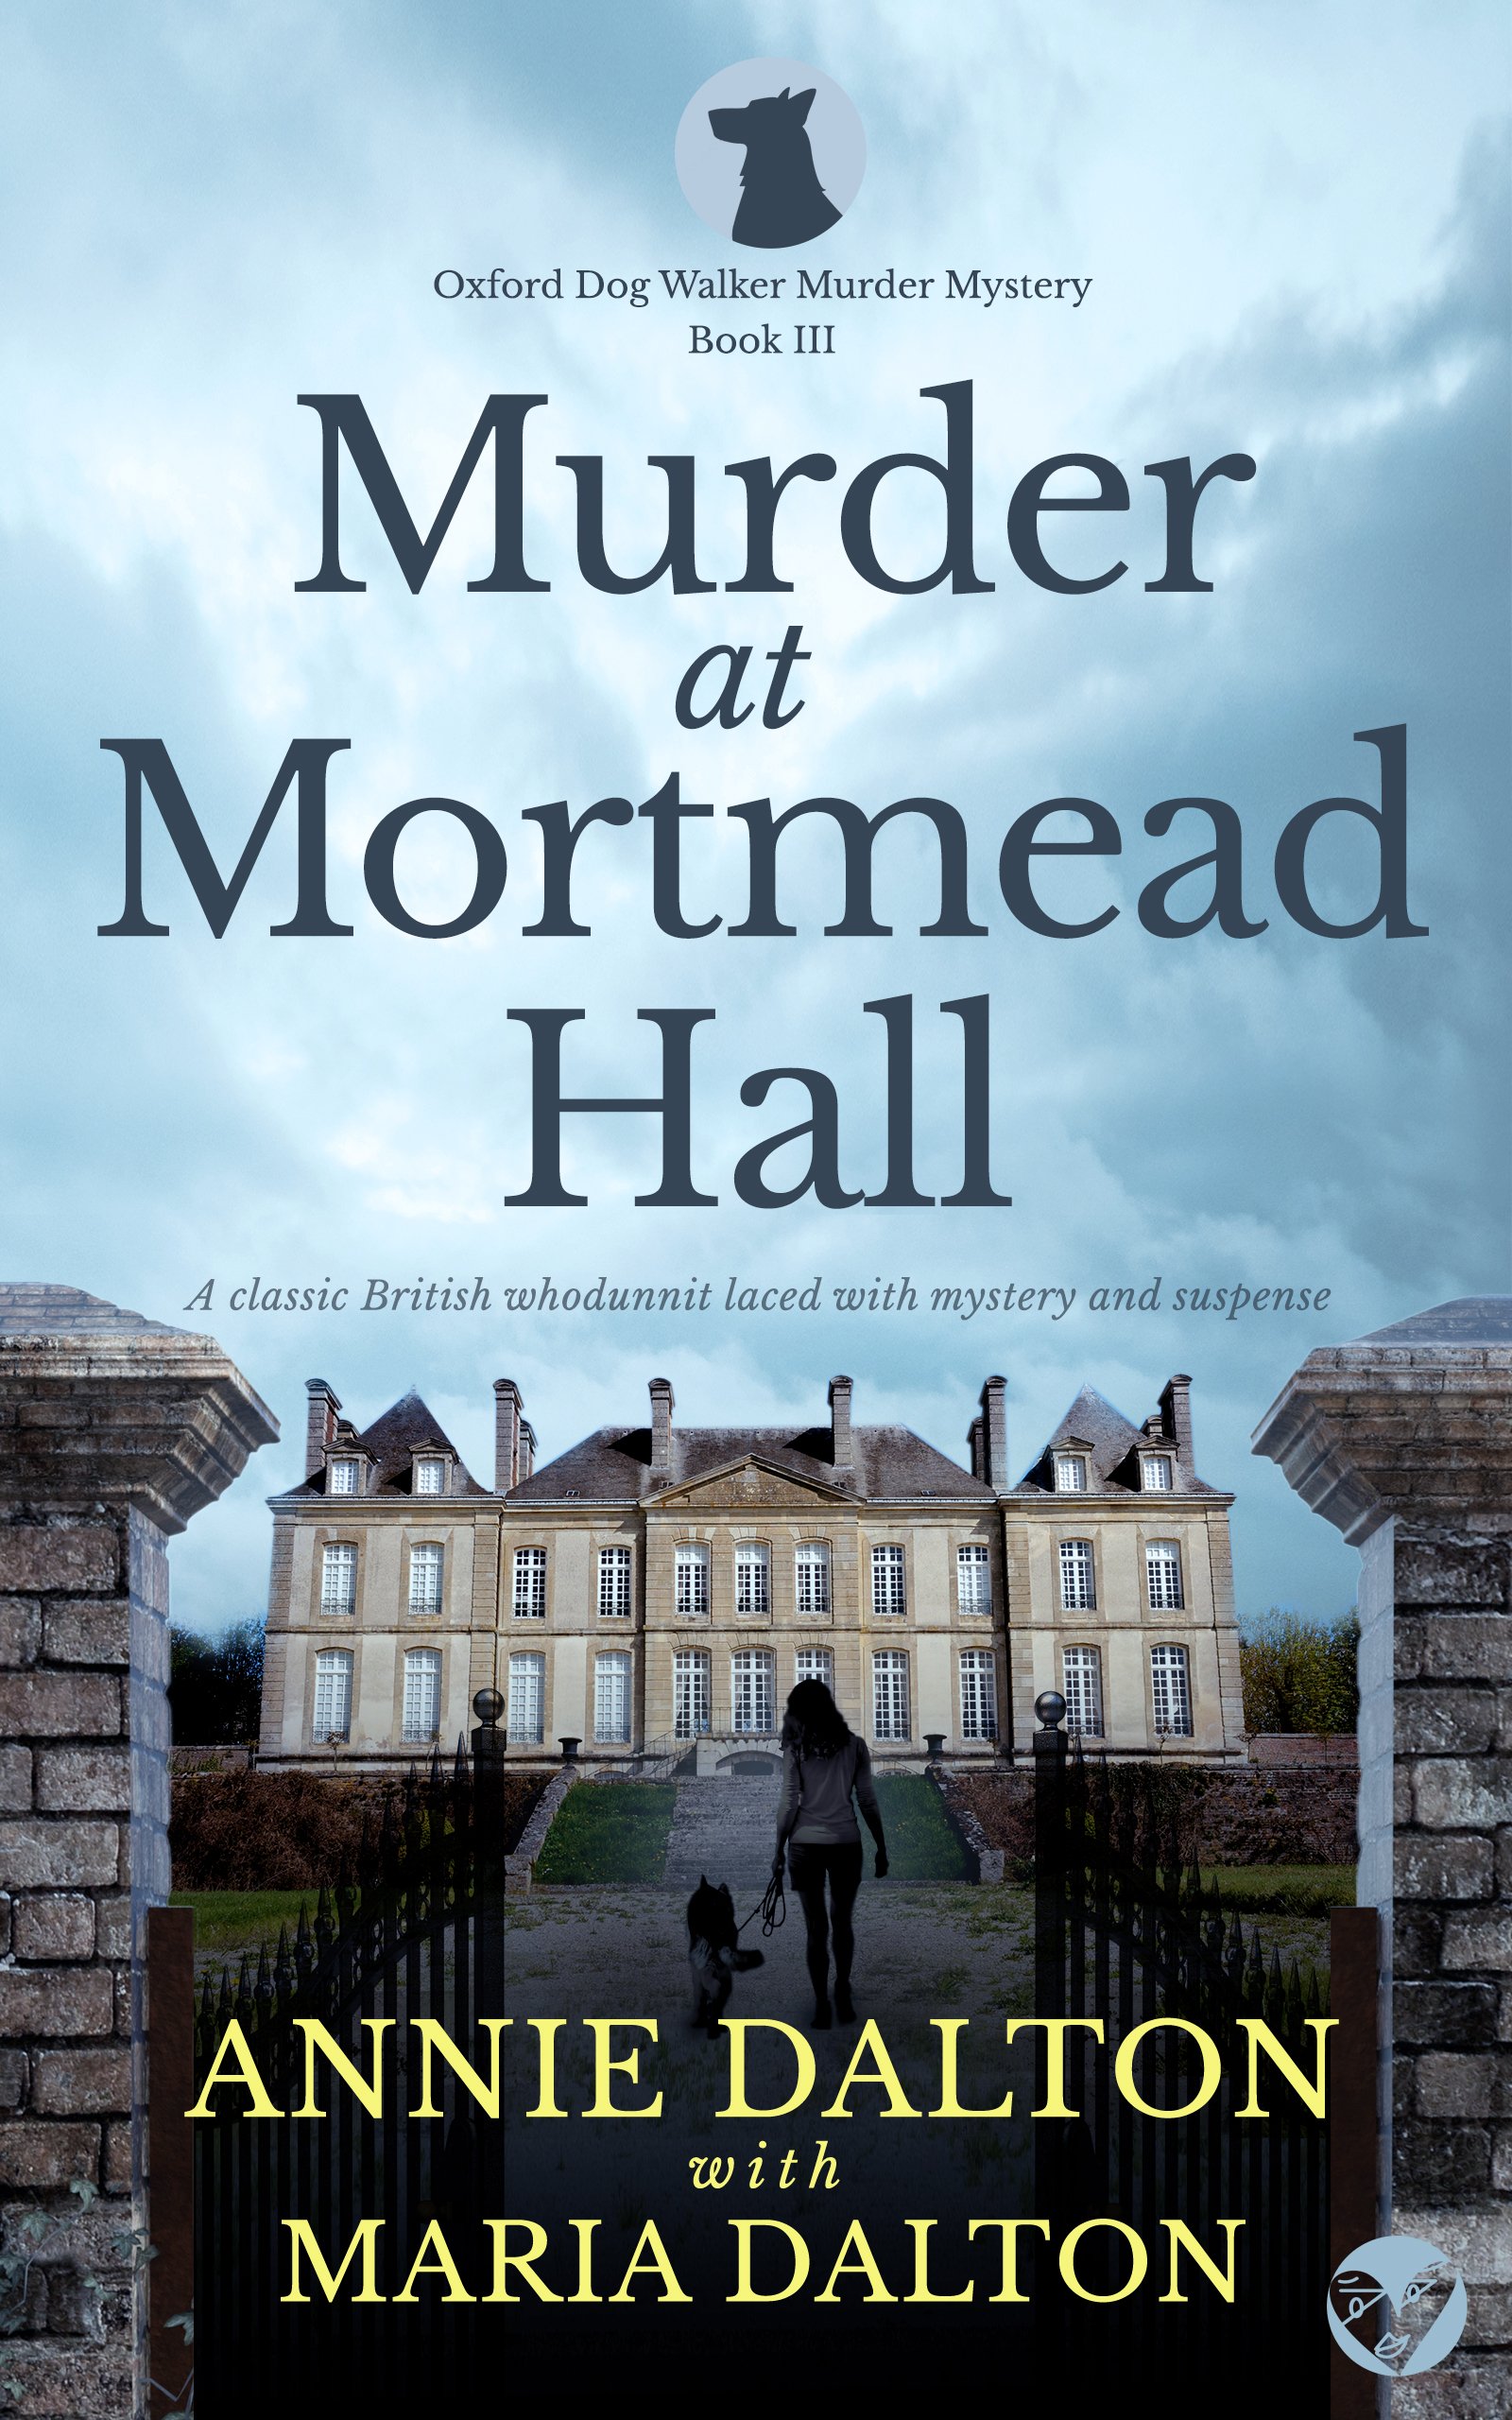 MURDER AT MORTMEAD HALL Cover publish.jpg